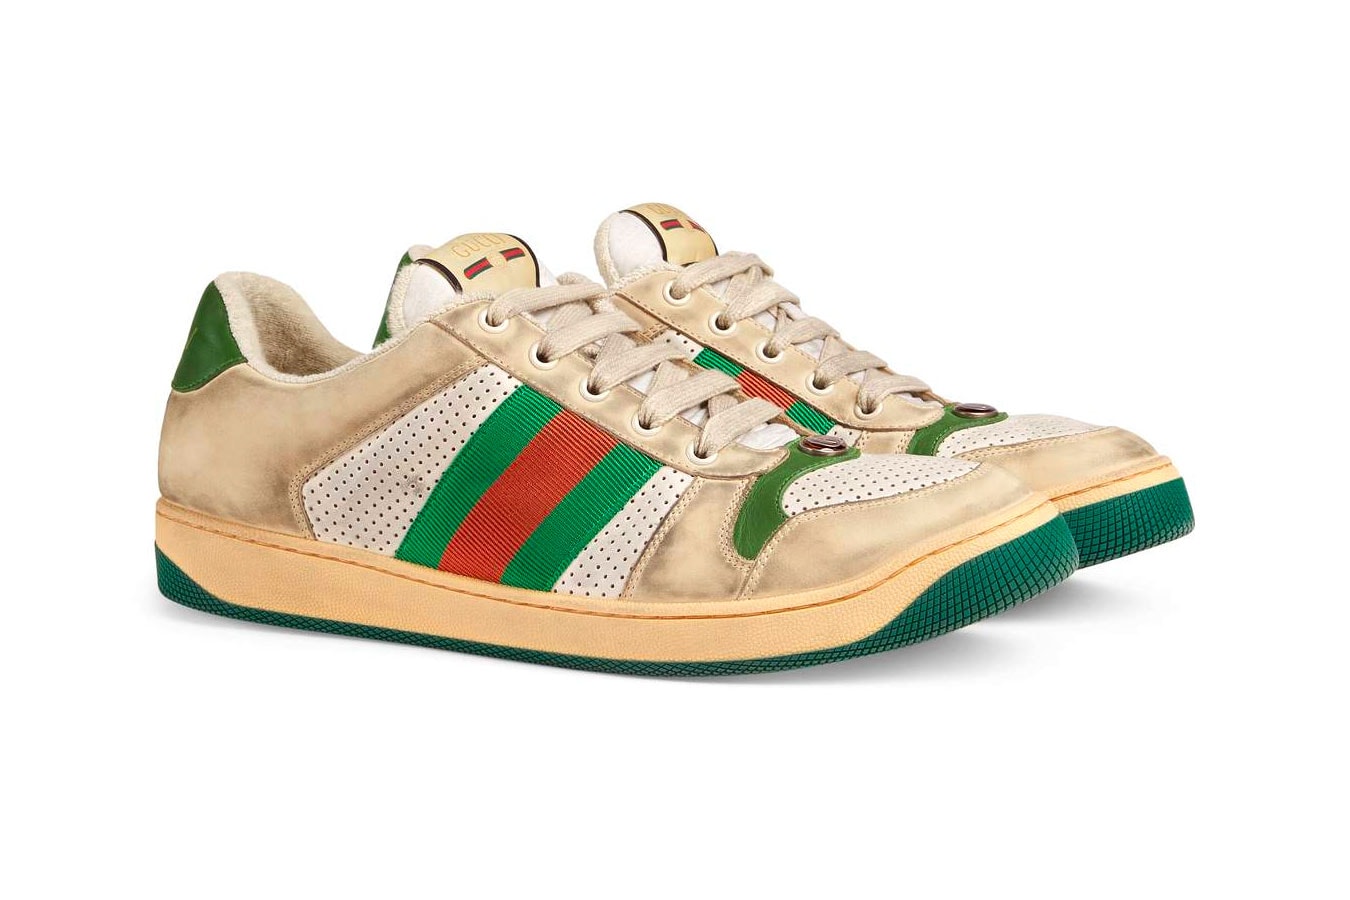 I'm a shopping pro - how to get Gucci shoes for nearly $500 less